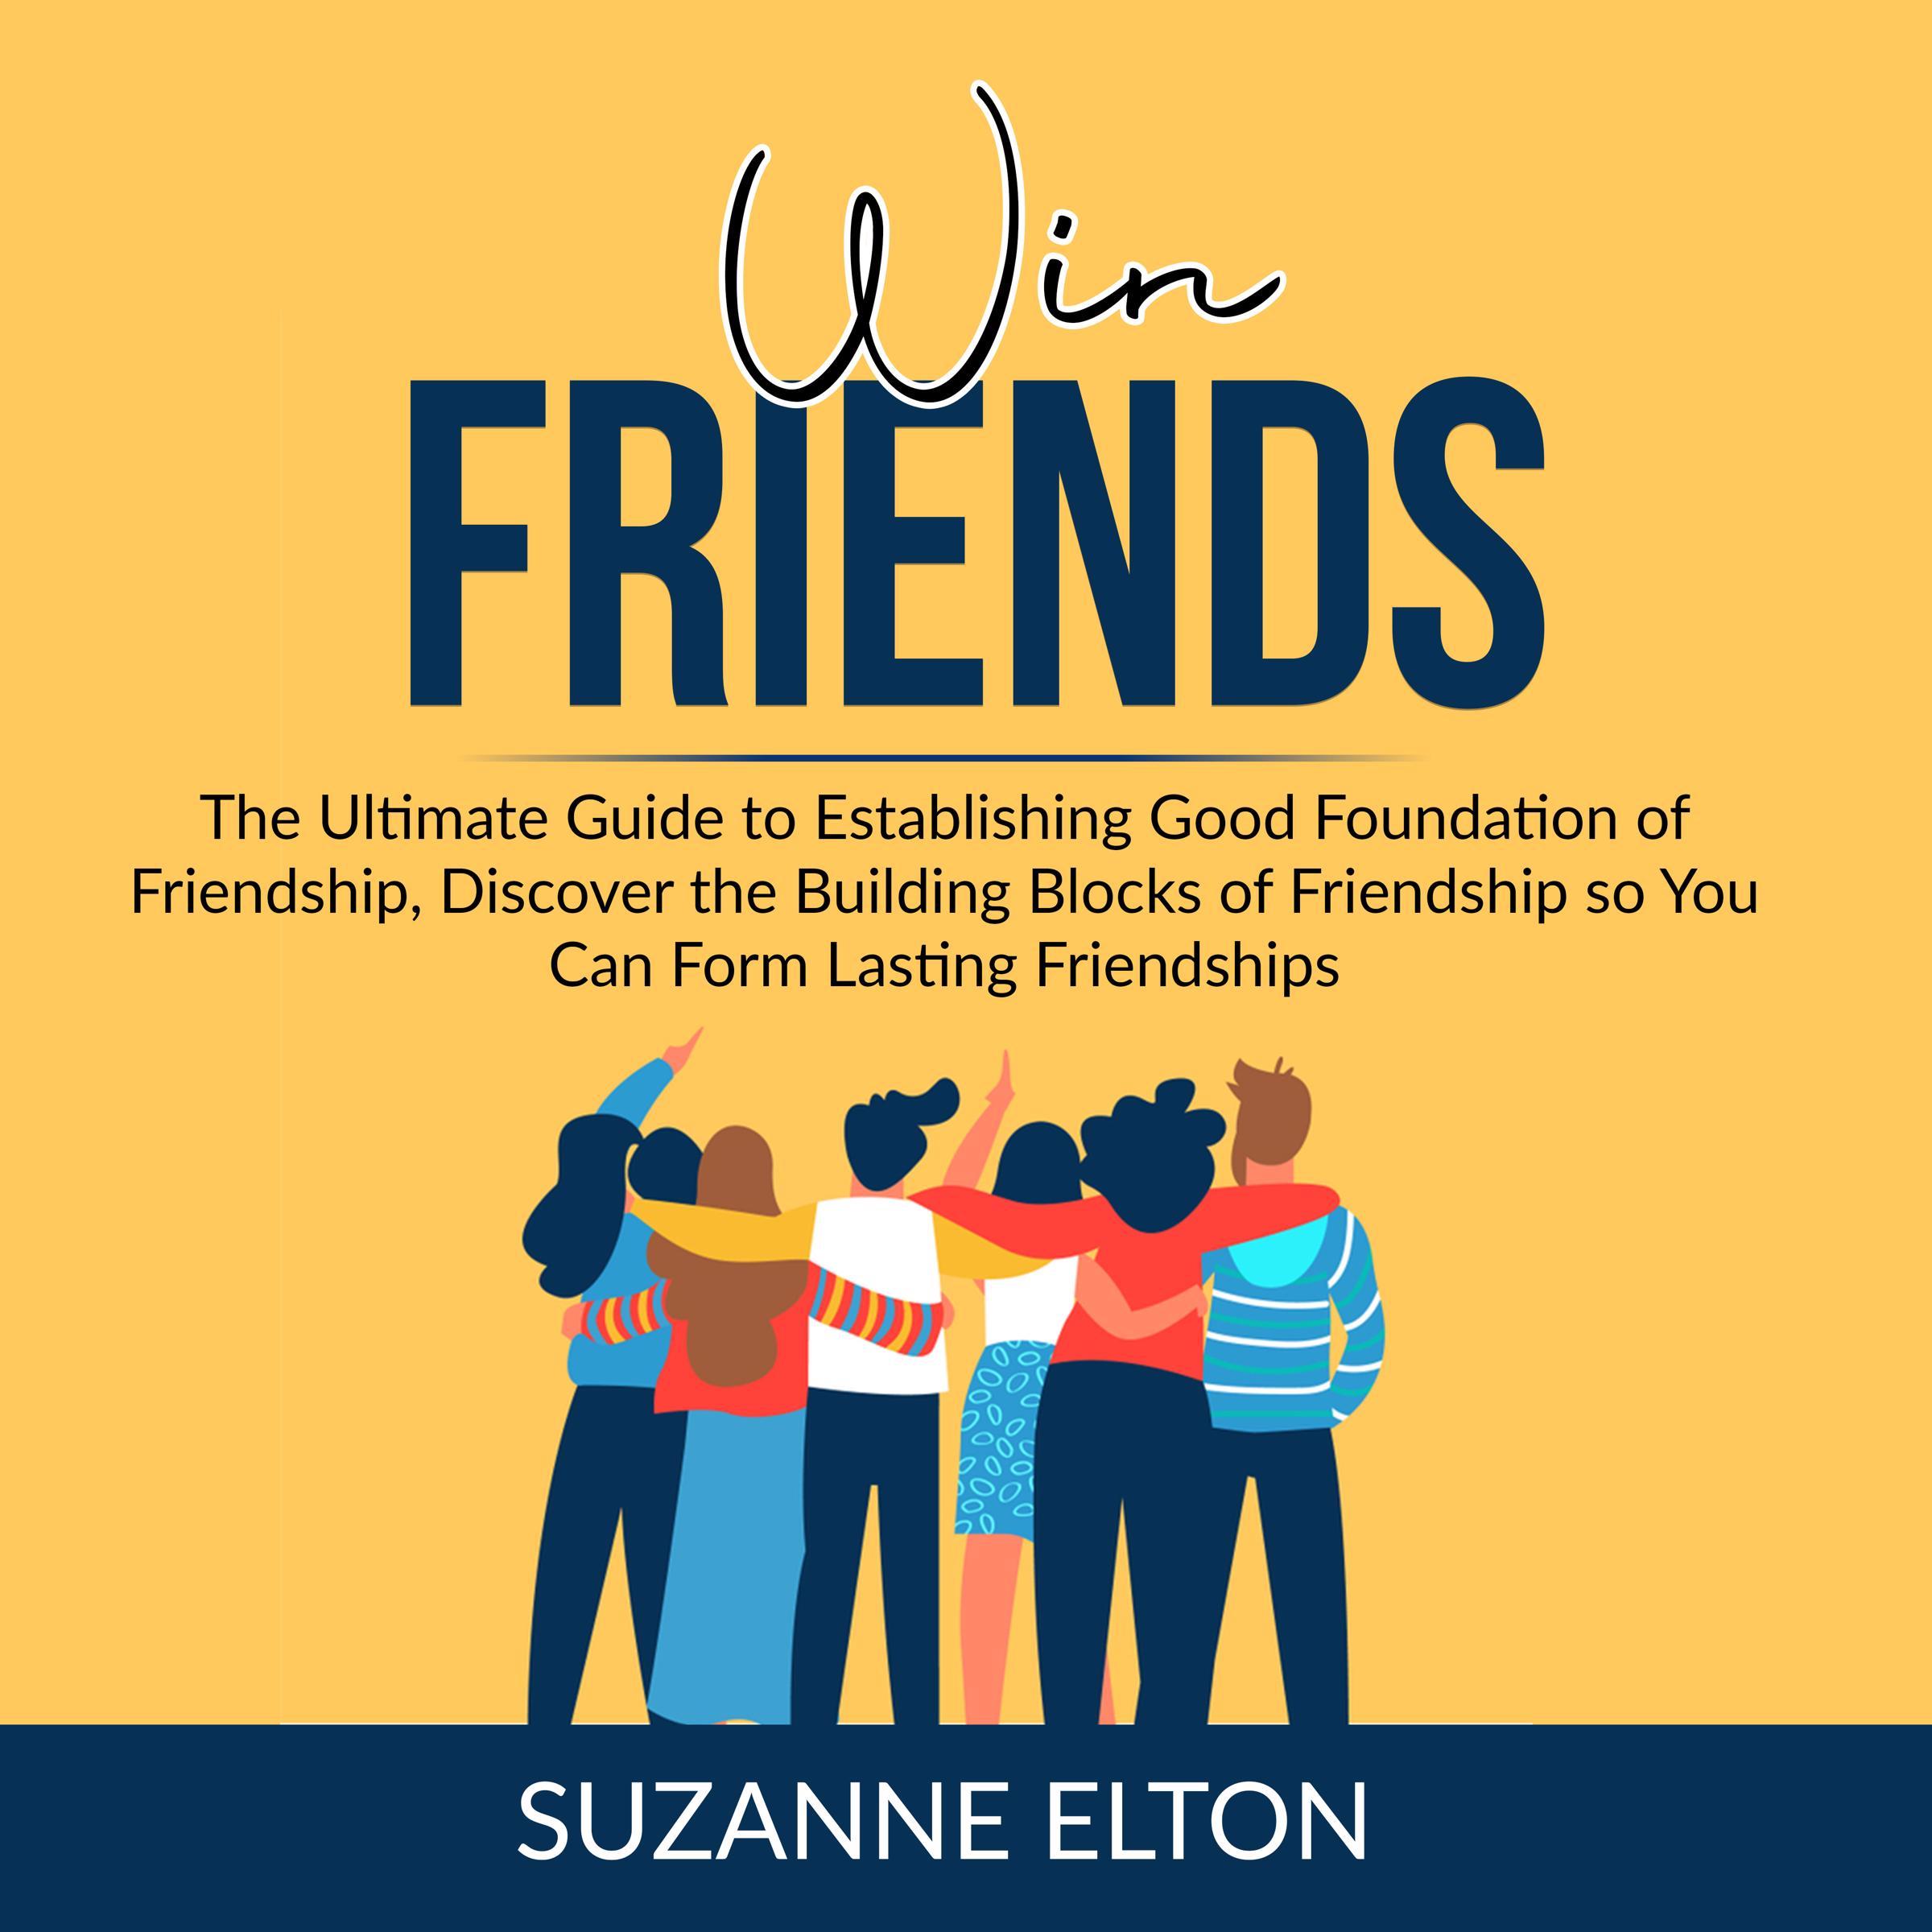 Win Friends: The Ultimate Guide to Establishing Good Foundation of Friendship, Discover the Building Blocks of Friendship so You Can Form Lasting Friendships